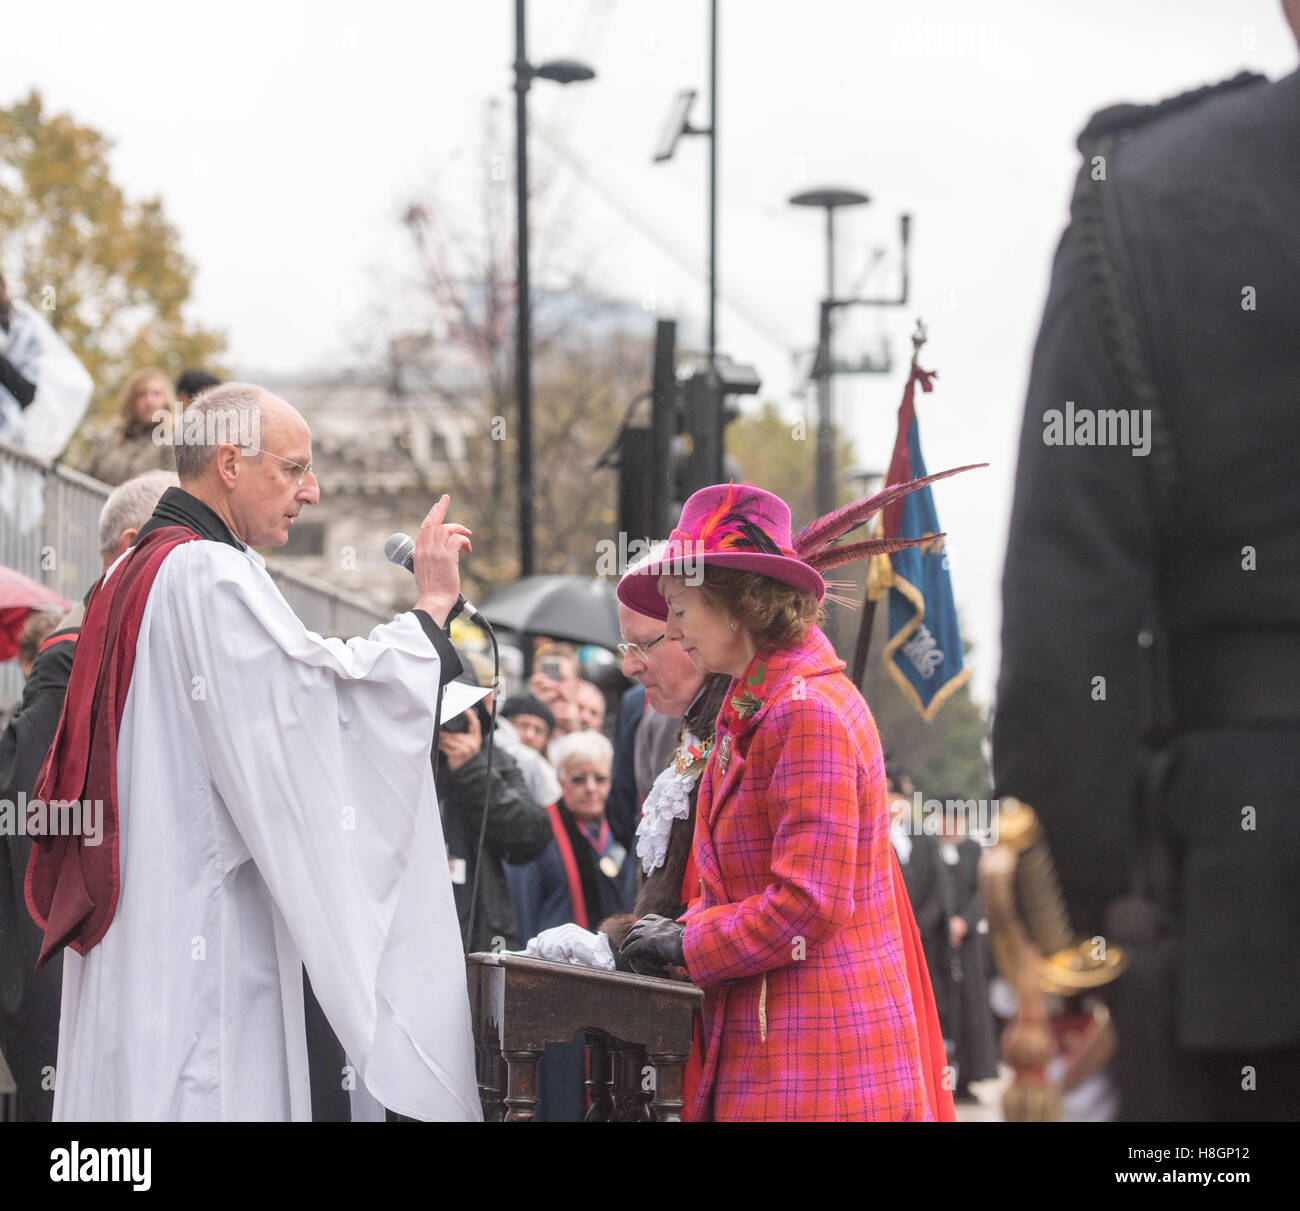 London, UK. 12th November, 2016. Dr Andrew Parmley, the Rt Hon the Lord Mayor of Lodoh recieves a blessing outside St paul's Credit:  Ian Davidson/Alamy Live News Stock Photo